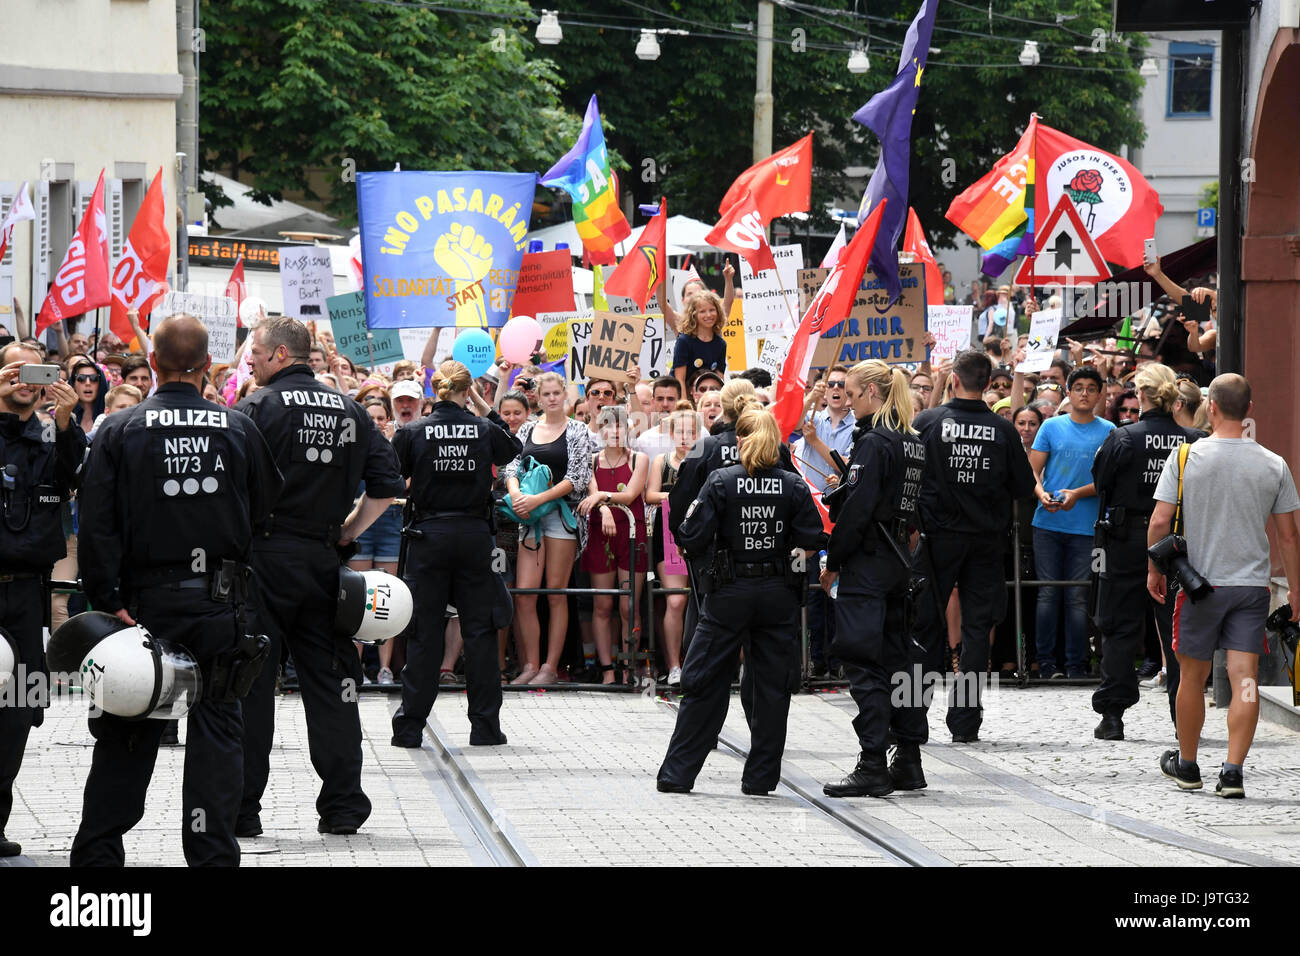 Karlsruhe, Germany. 3rd June, 2017. People participate in a counter demonstration against a demonstration of right-wing extremists in Karlsruhe, Germany, 3 June 2017. The rightist party 'Die Rechte' called out for the 'Tag der deutschen Zukunft' (lit. 'Day of German future'). More than 6,000 participants are expected at multiple counter-demonstrations. Photo: Uli Deck/dpa/Alamy Live News Stock Photo